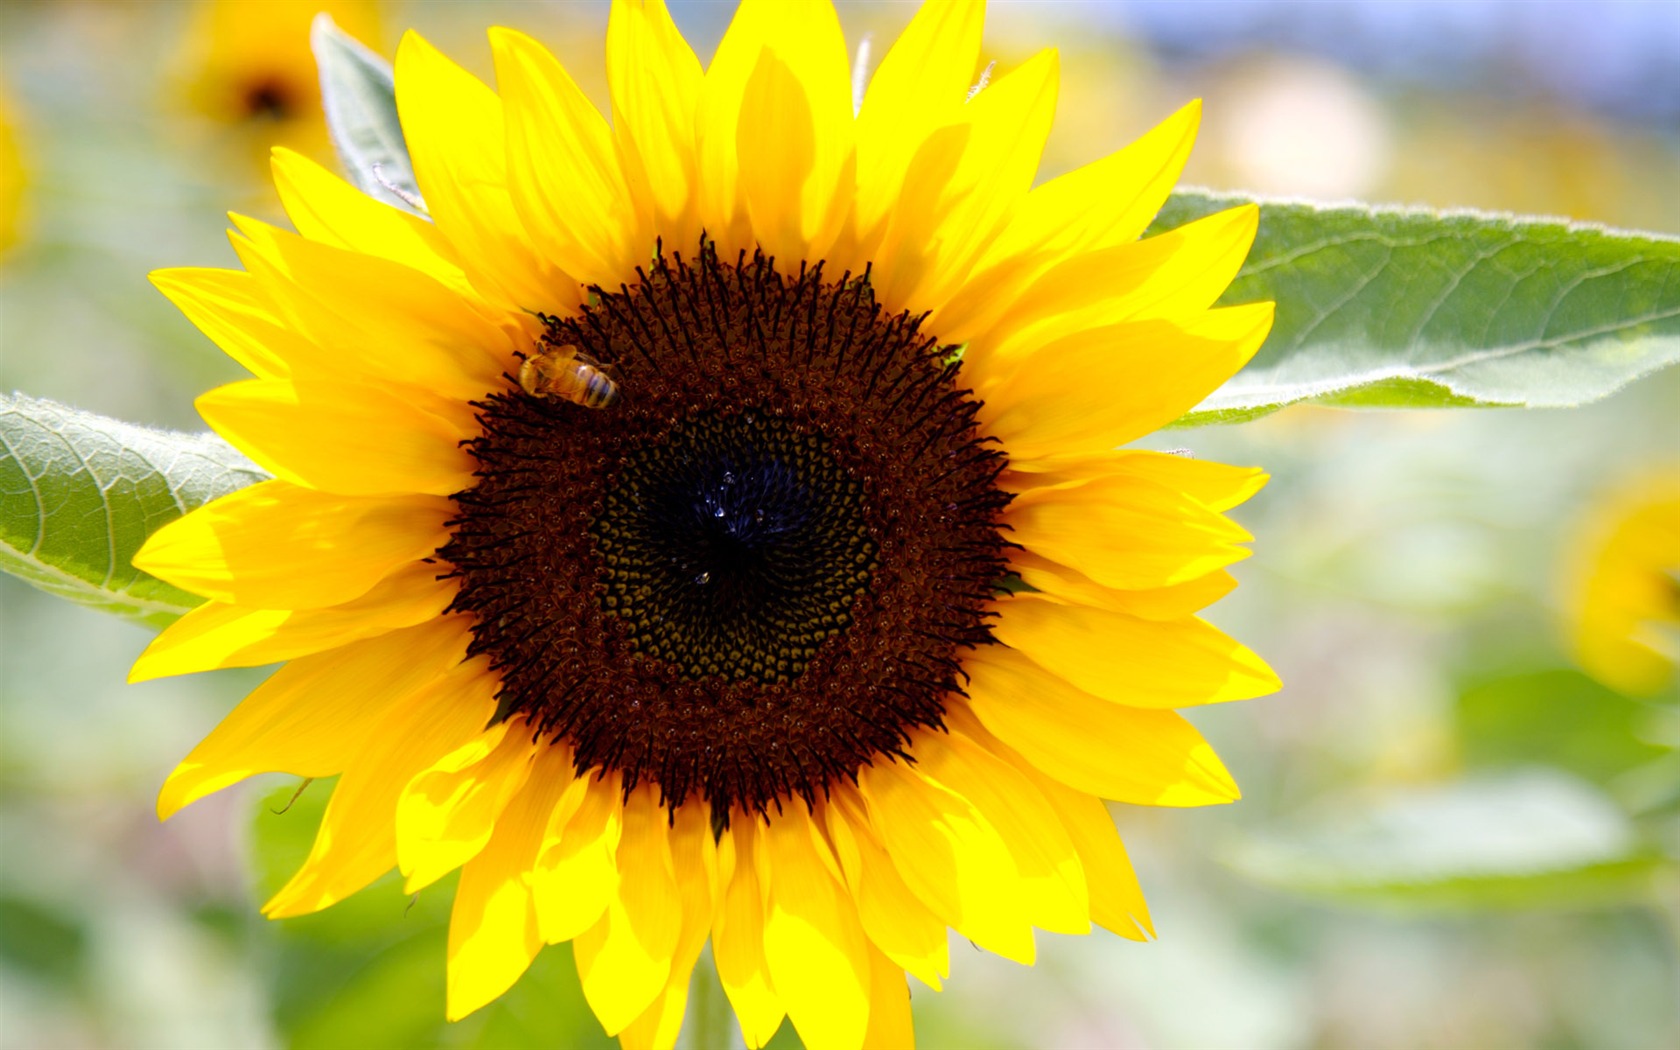 Sunny sunflower photo HD Wallpapers #22 - 1680x1050